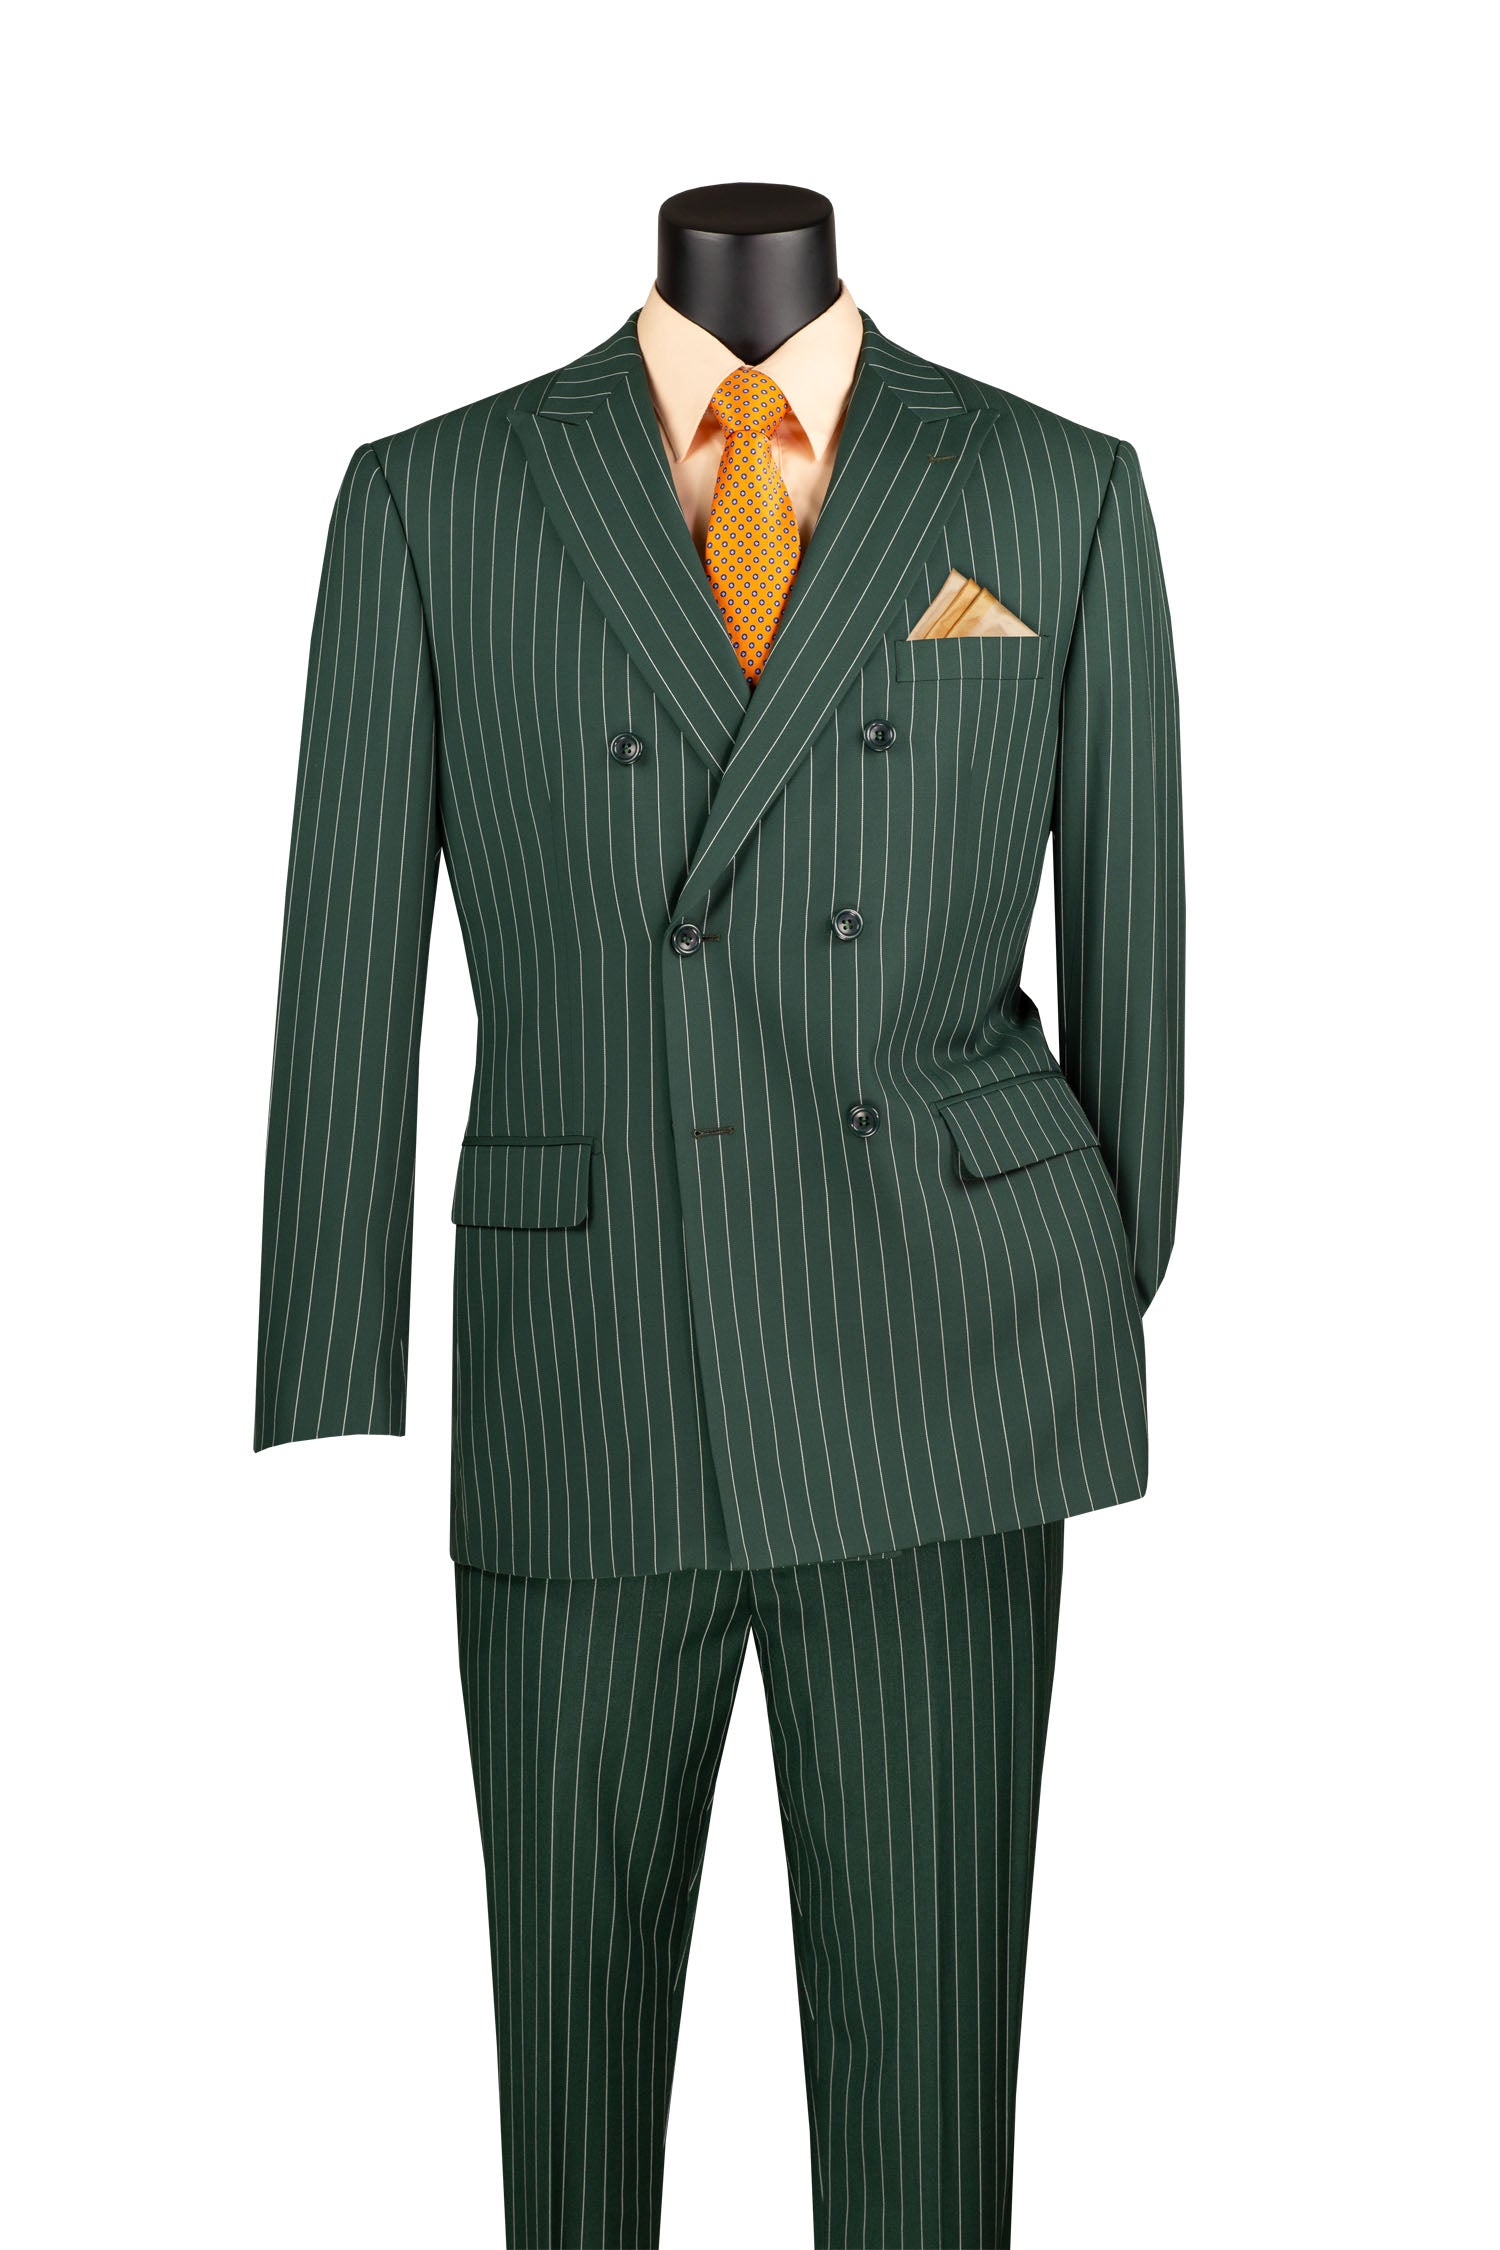 Rockefeller Collection - Double Breasted Stripe Suit Hunter Green Regular Fit 2 Piece